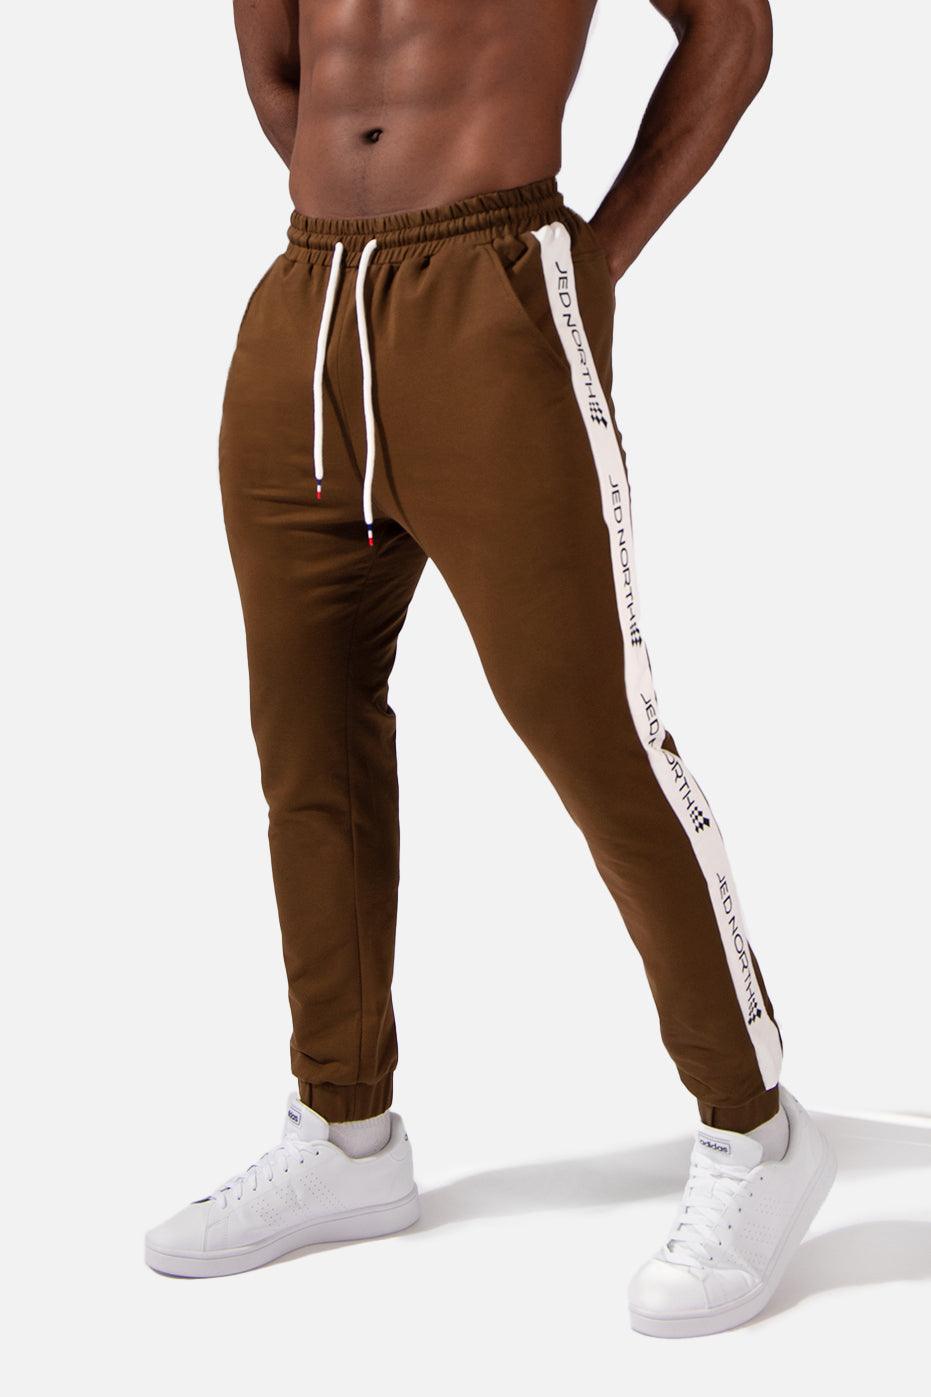 Old School Joggers - Brown - Jed North